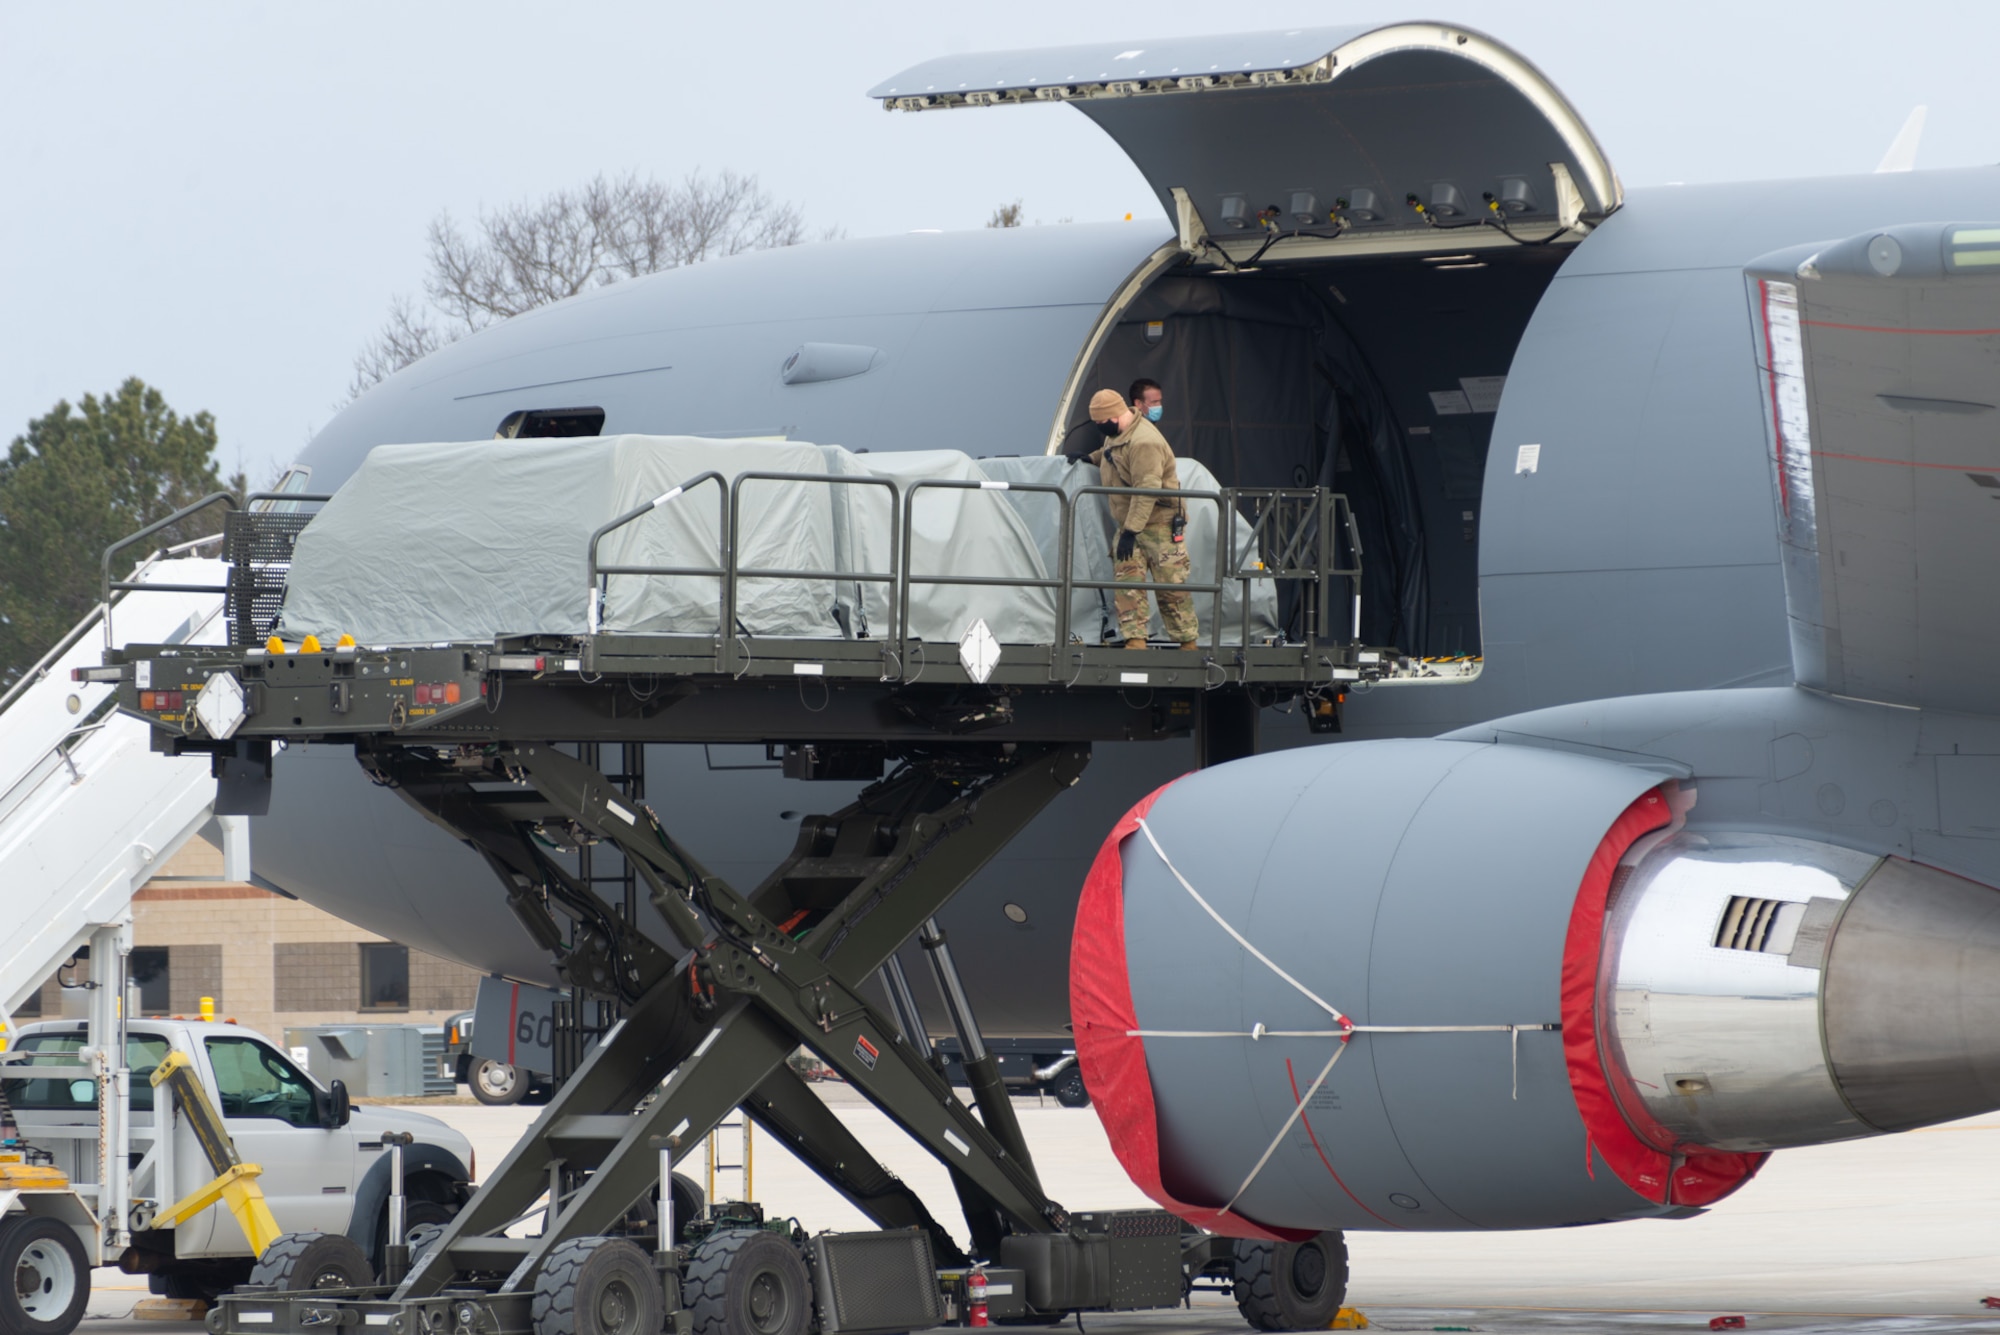 U.S. Air Force Master Sgt. Timothy Dupuis and Tech. Sgt. Sean Avery, both assigned to the 157th Maintenance Group, New Hampshire Air National Guard, load seat pallets onto a KC-46A tanker at Pease Air National Guard Base, New Hampshire, Jan. 14, 2021. The tanker is one of Pease’s three jets being used to transport about 500 National Guardsmen from New Hampshire, Oklahoma and Nevada to Washington D.C. to provide security during Inauguration Day Jan. 20. (U.S. Air Force photo by Tech. Sgt. Aaron Vezeau)